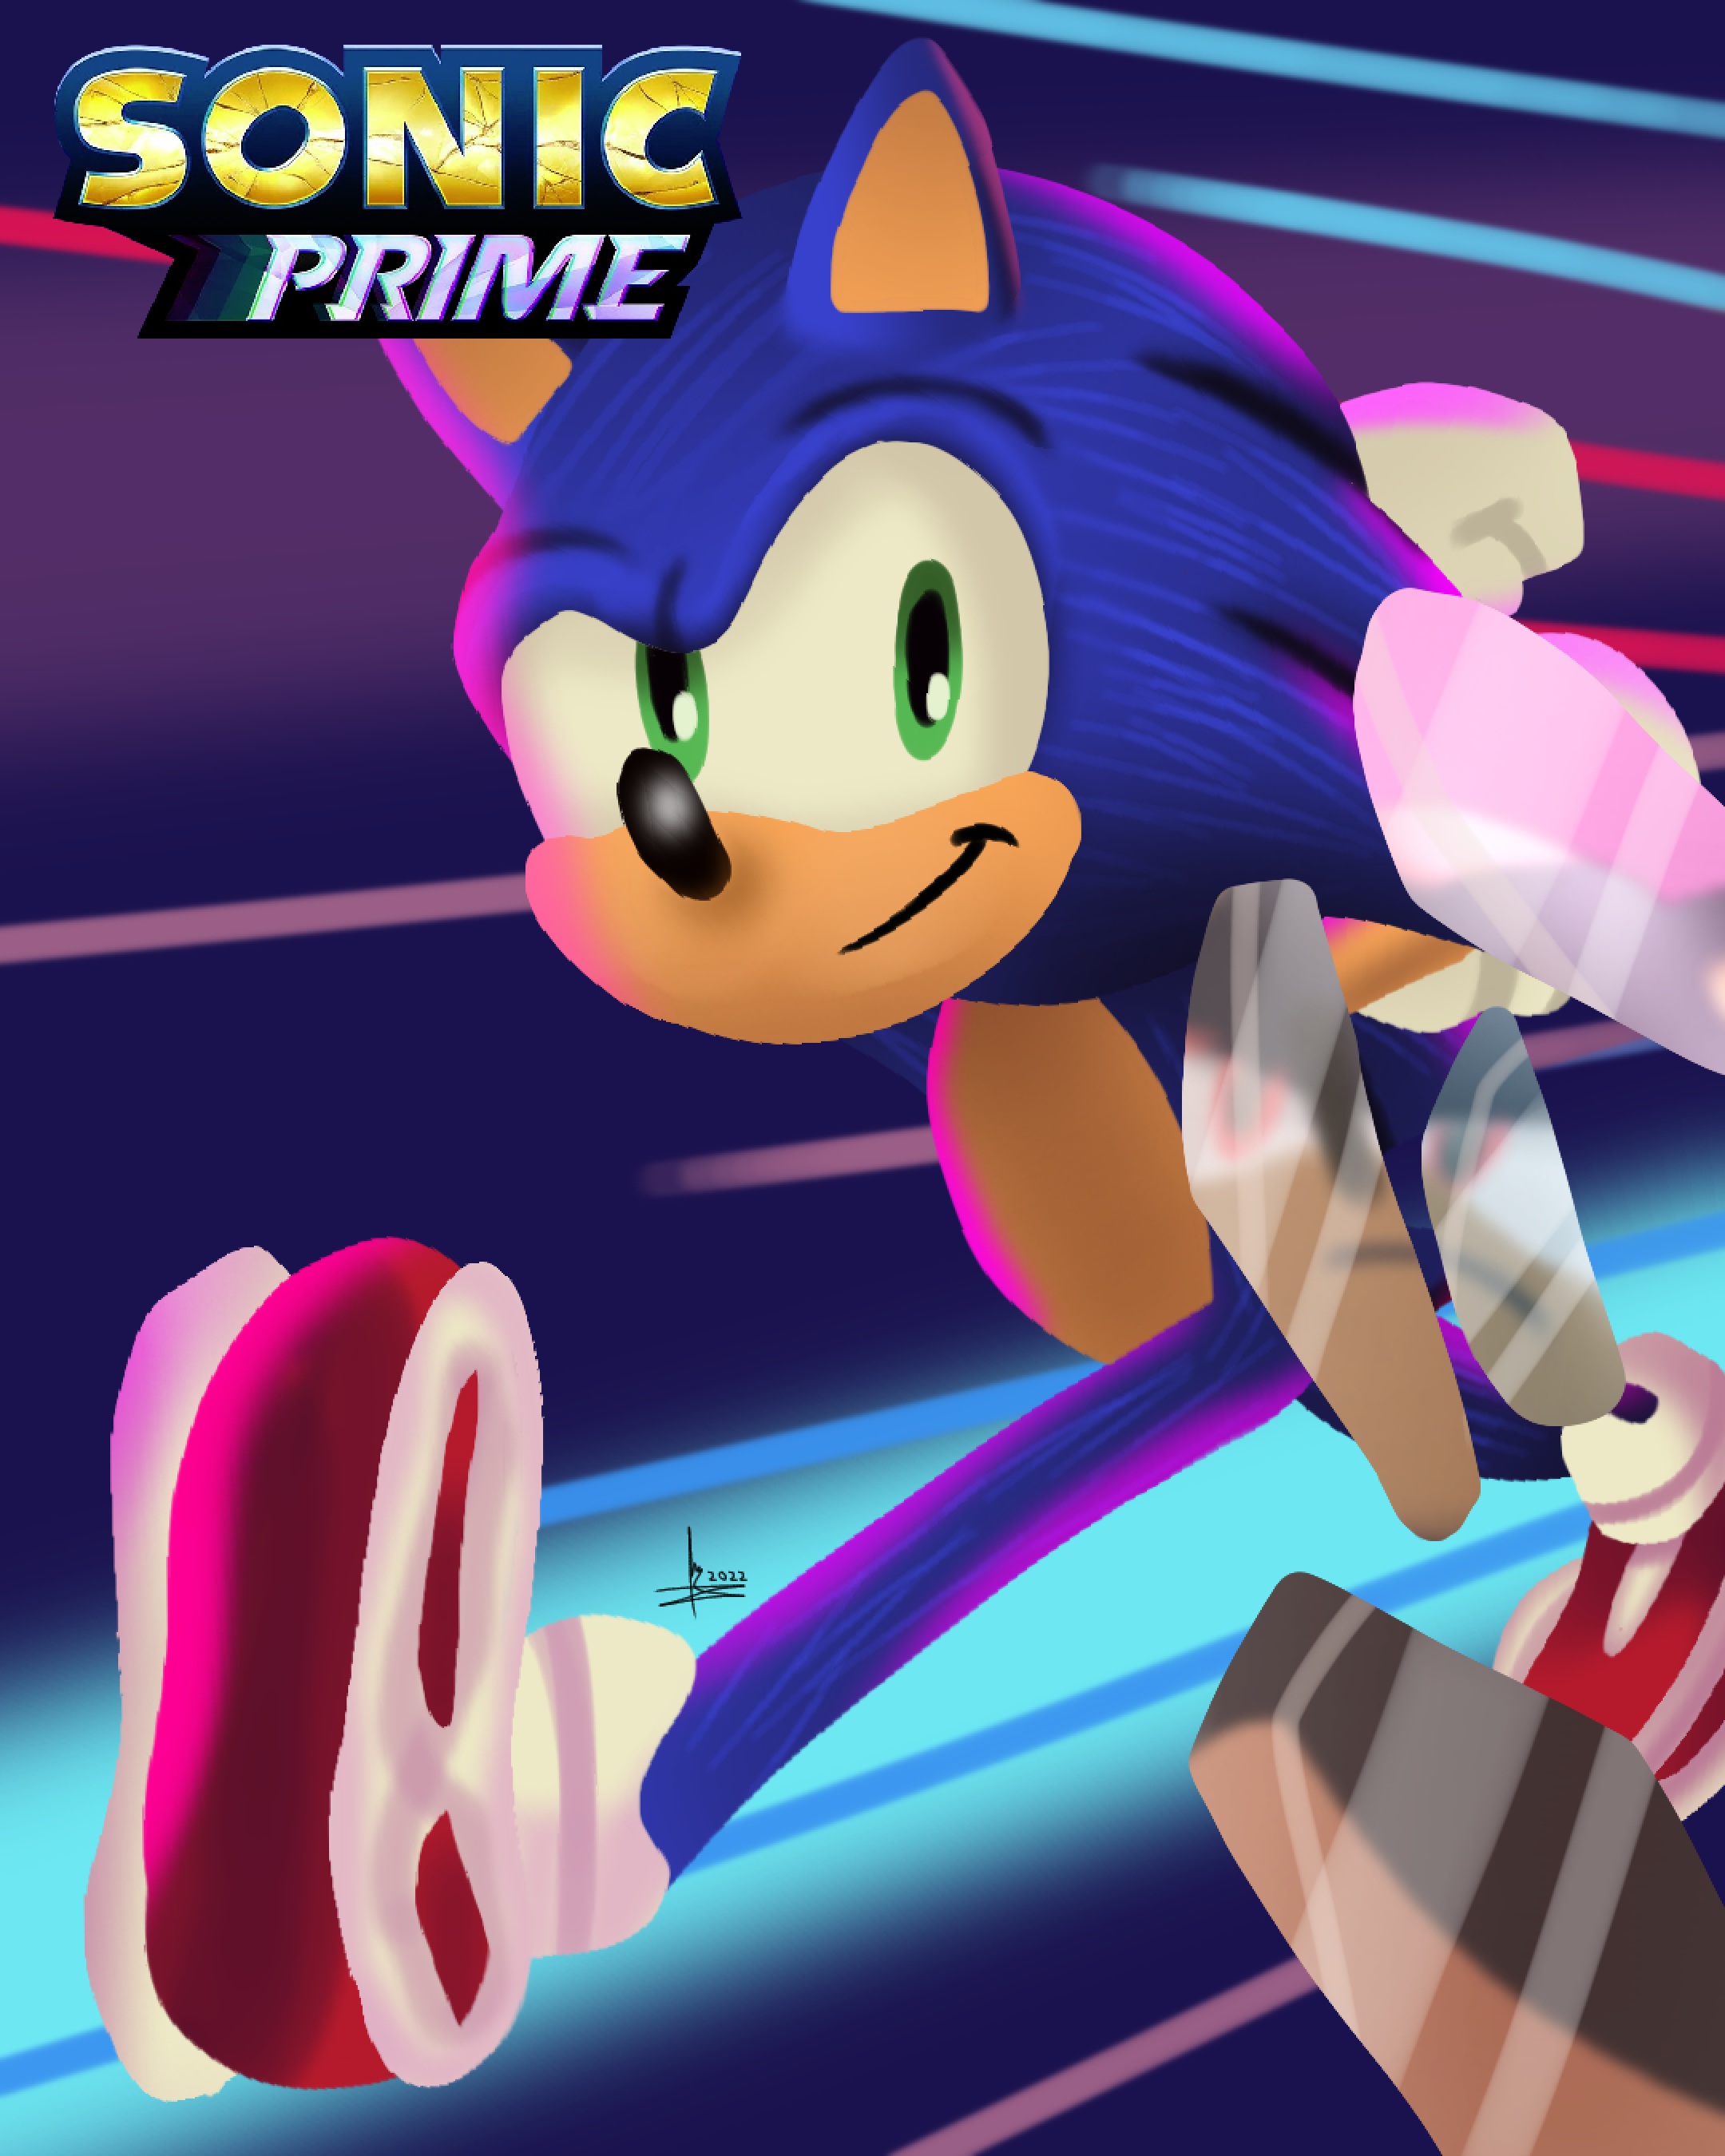 Sonic Speed Simulator Poster (May 18, 2022) by JXDendo23 on DeviantArt